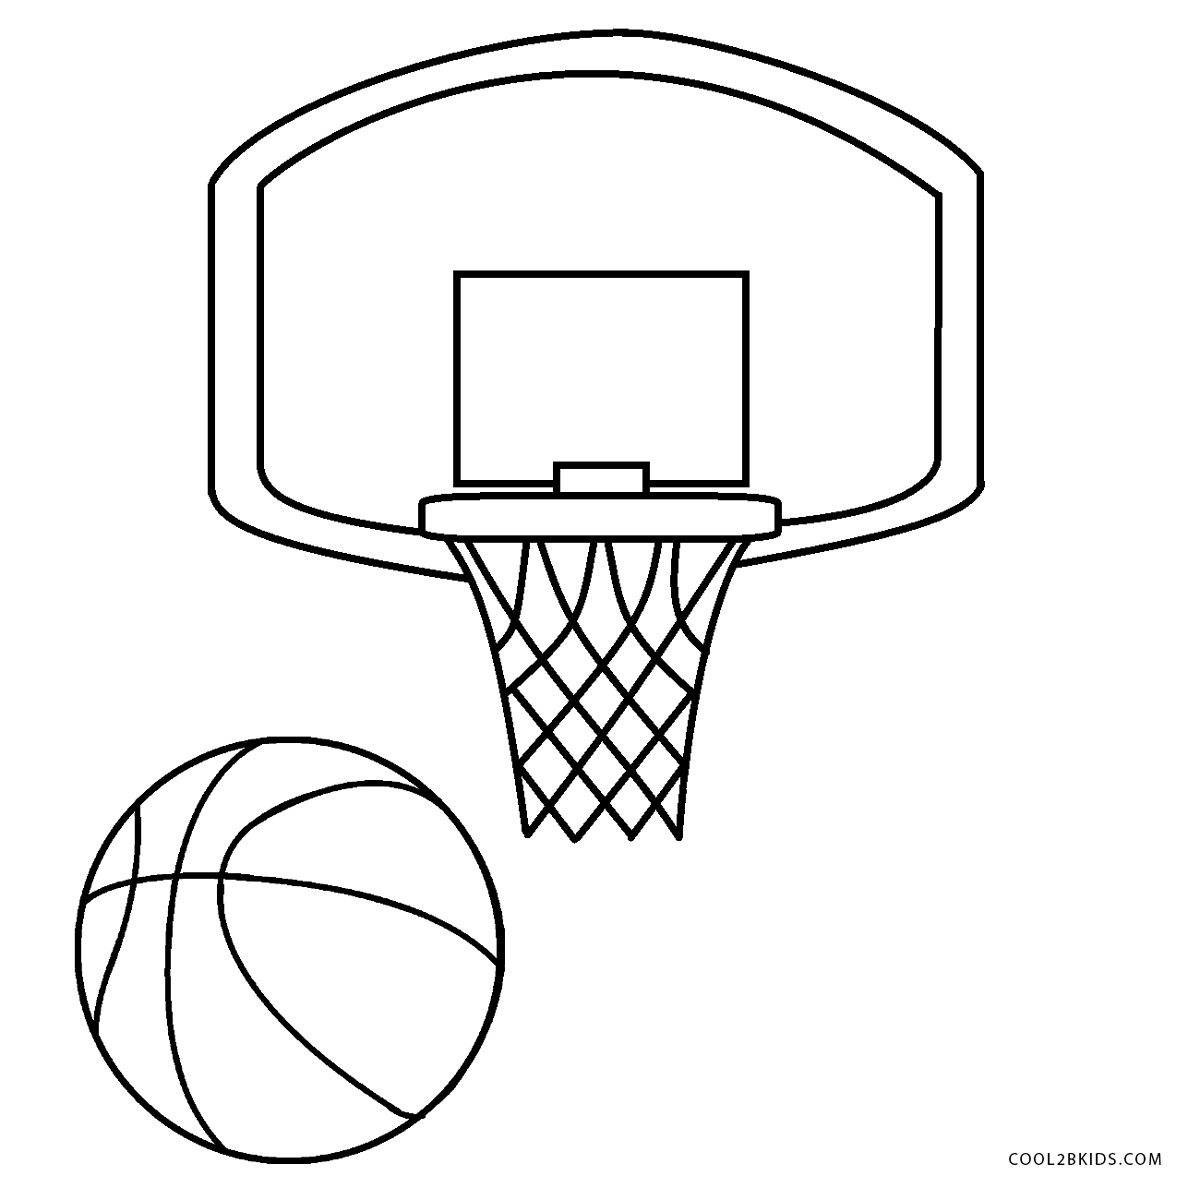 Christmas - 33+ Basketball Coloring Pages for Adults